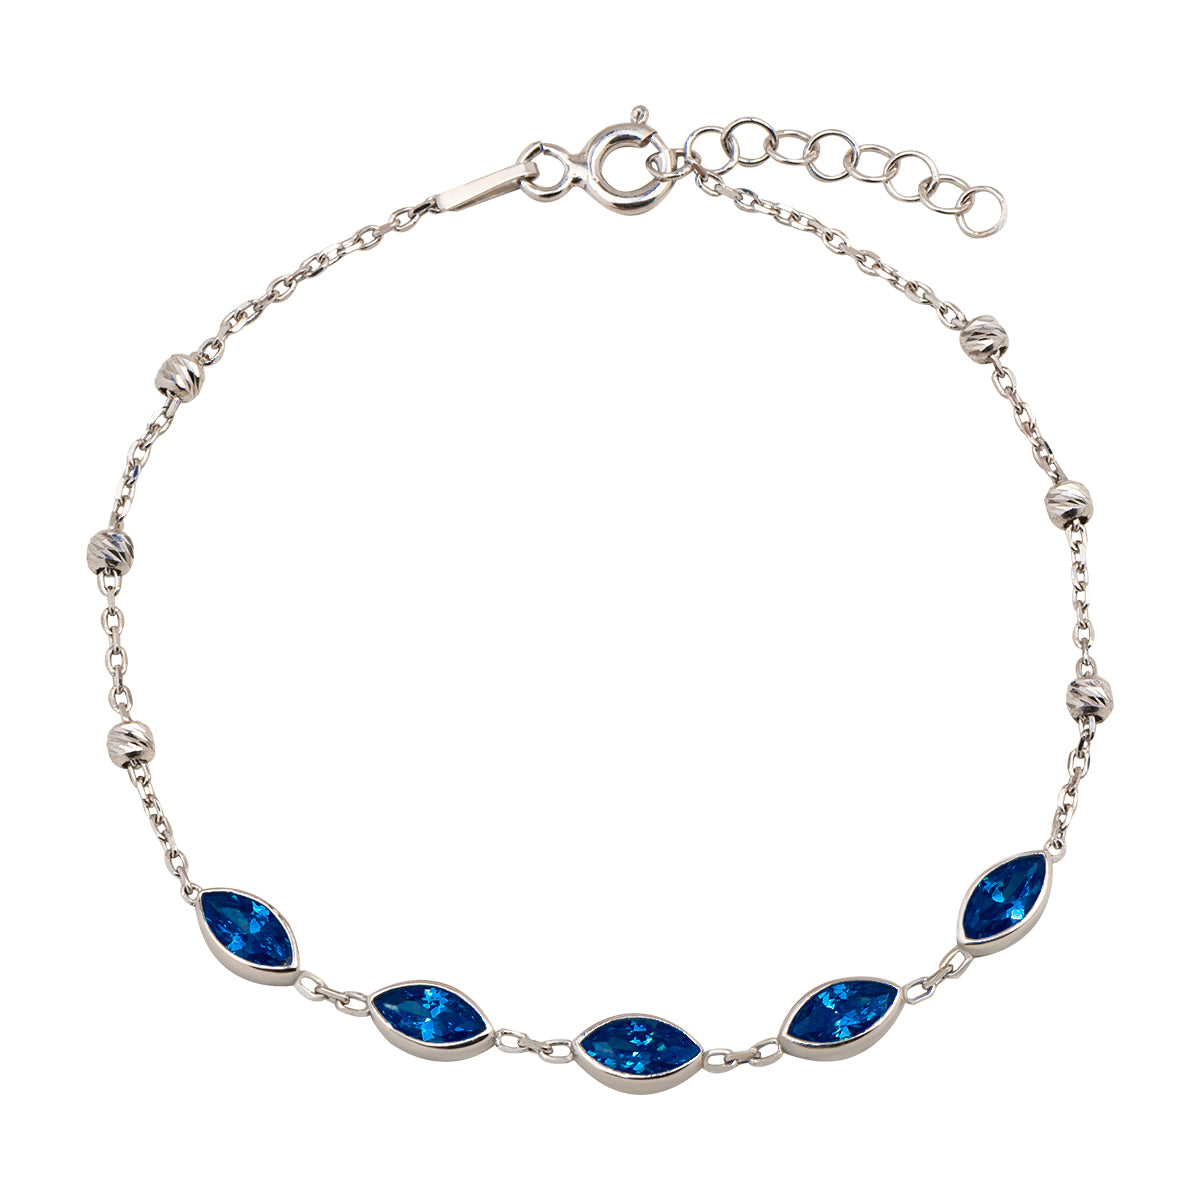 925 Sterling silver bracelet with almond shape beads with navy blue zirconia stones.